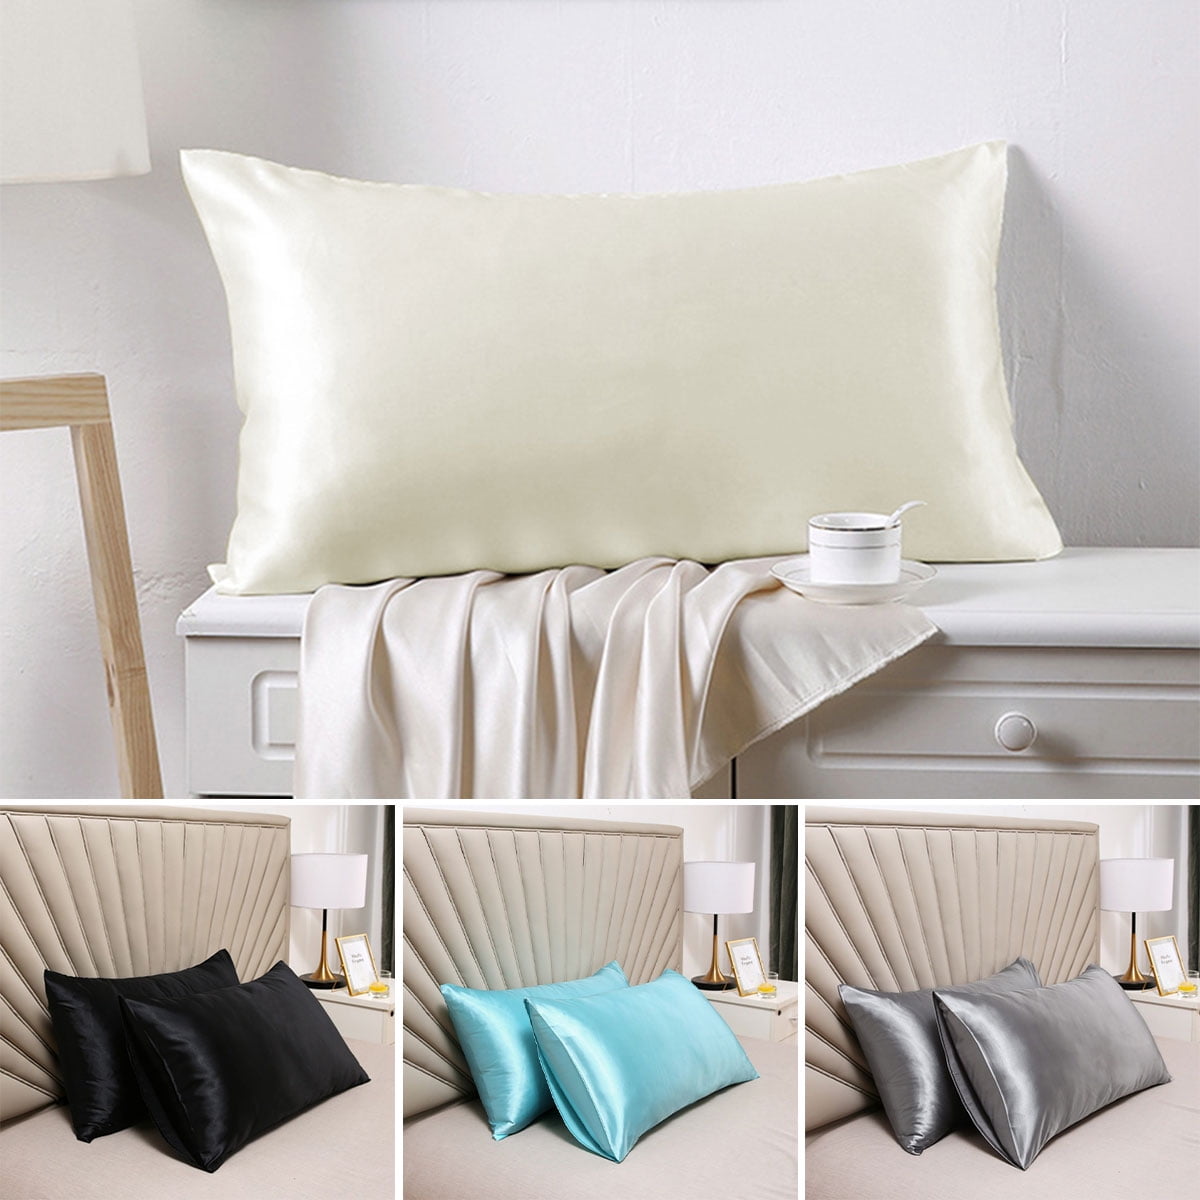 Details about   NTBAY Envelope Pillowcase 2 Pack Standard Queen King CK Size 100% Satin Fabric 